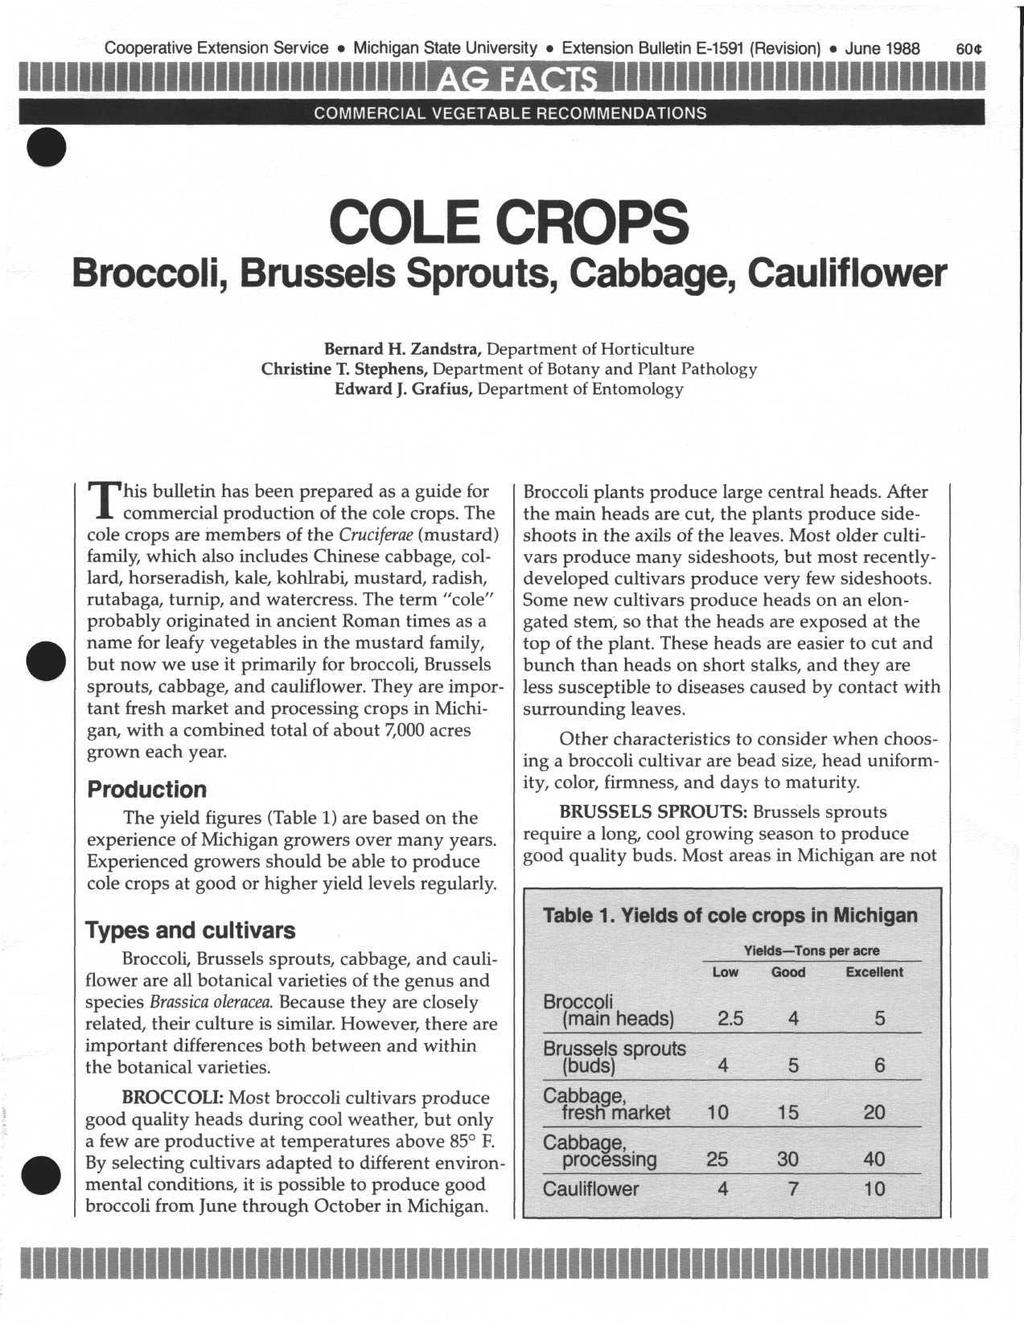 Cooperative Extension Service Michigan State University Extension Bulletin E-1591 (Revision) June 1988 60$ COMMERCIAL VEGETABLE RECOMMENDATIONS COLE CROPS Broccoli, Brussels Sprouts, Cabbage,